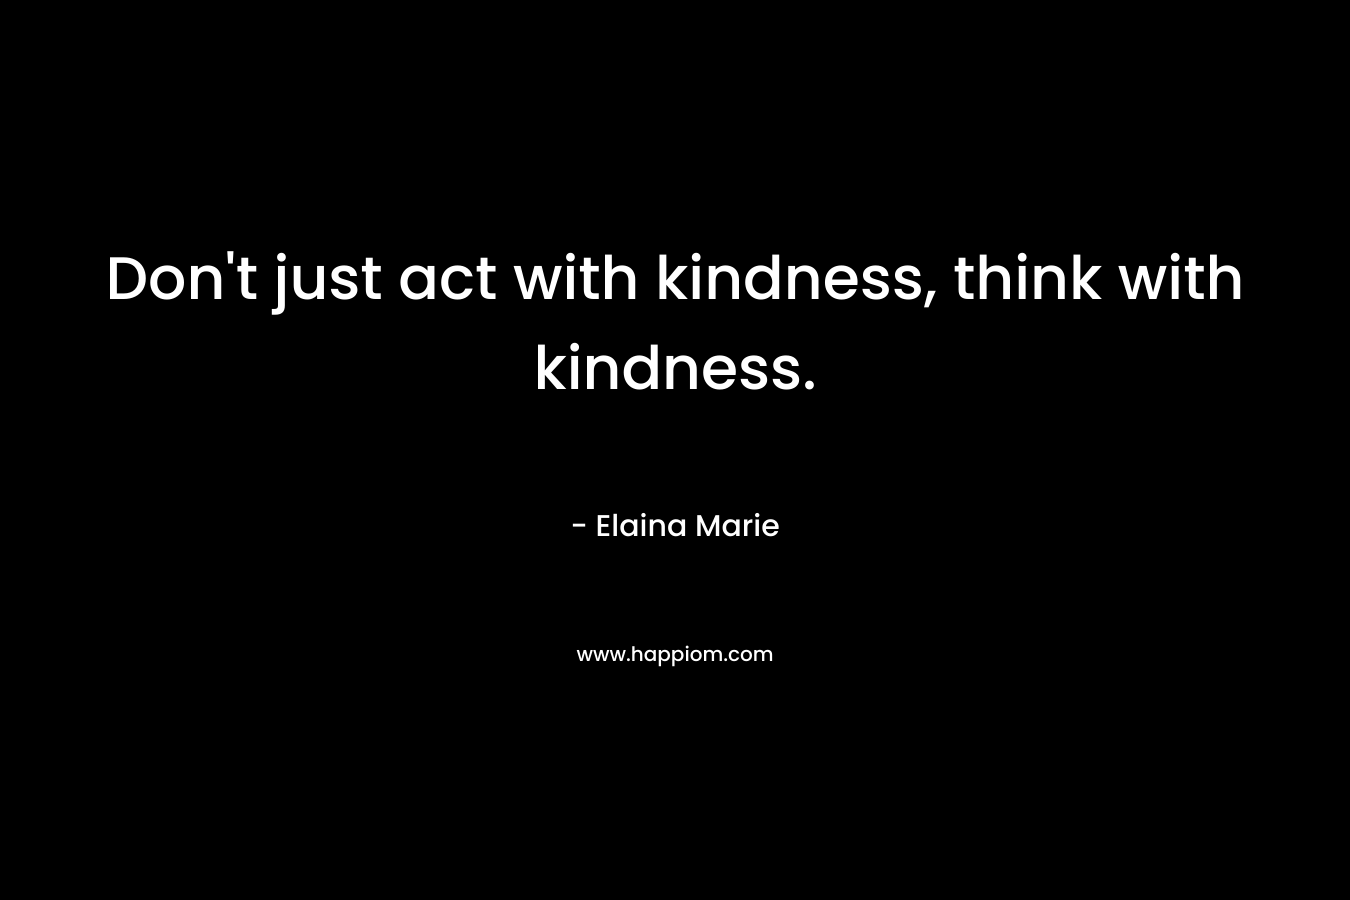 Don't just act with kindness, think with kindness.